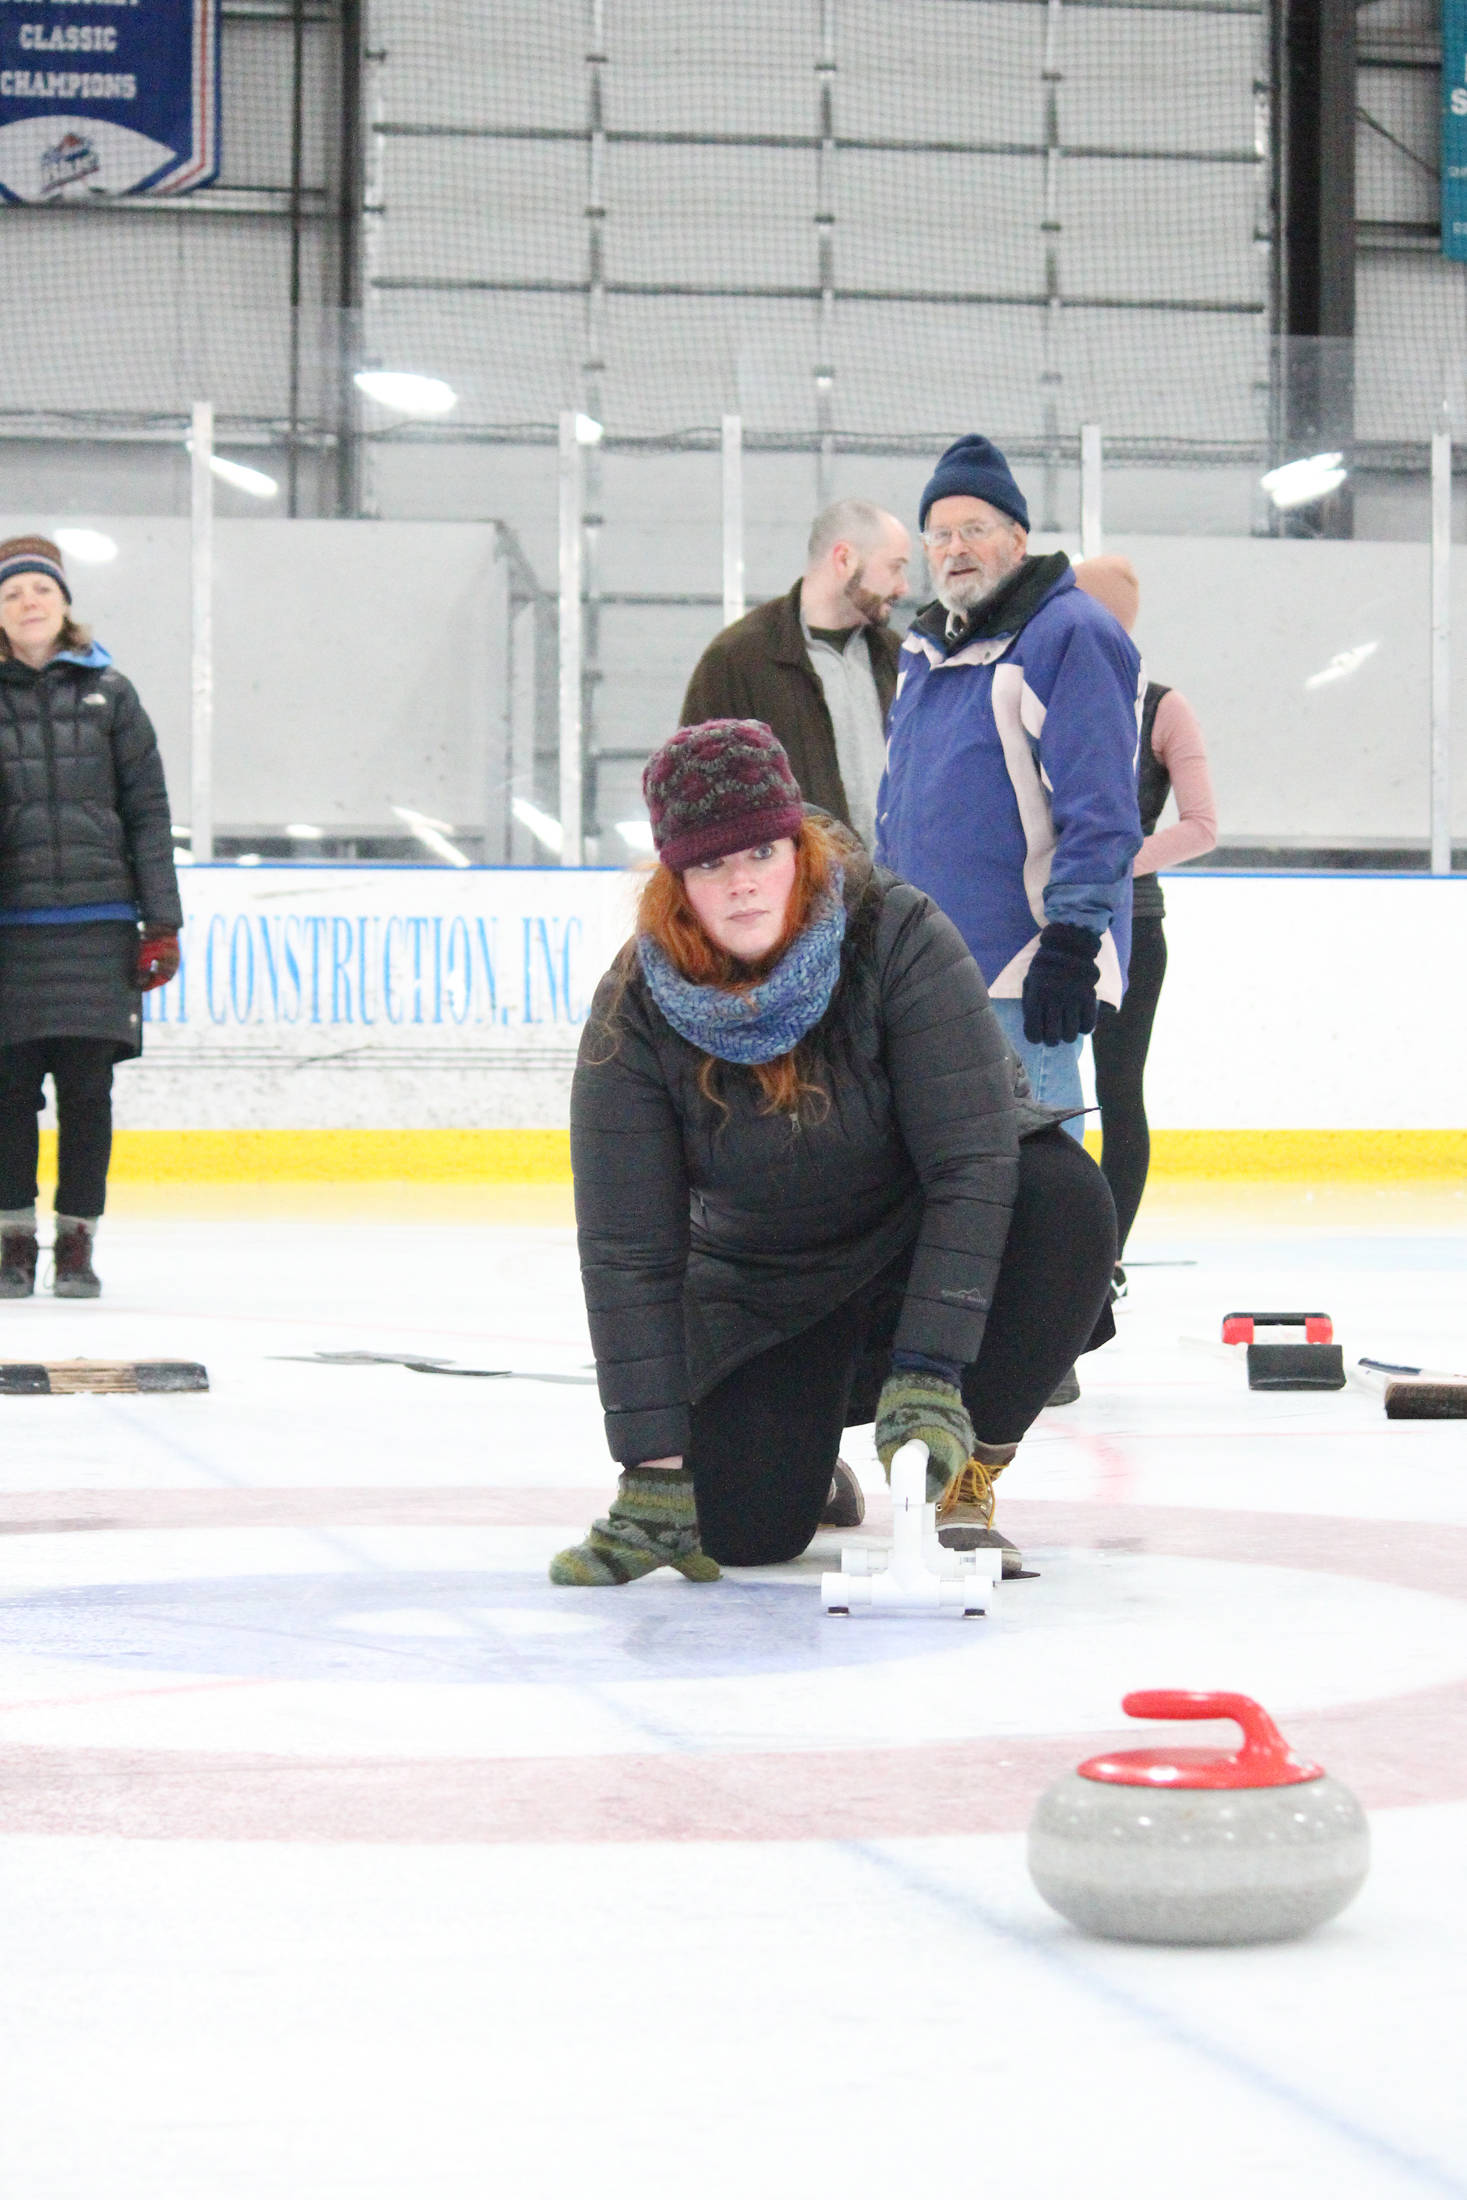 Trina Uvaas watches the progress of a curling stone she practiced delivering during a Learn to Curl fundraising event Saturday, Jan. 12, 2019 at the Kevin Bell Arena in Homer, Alaska. (Photo by Megan Pacer/Homer News)